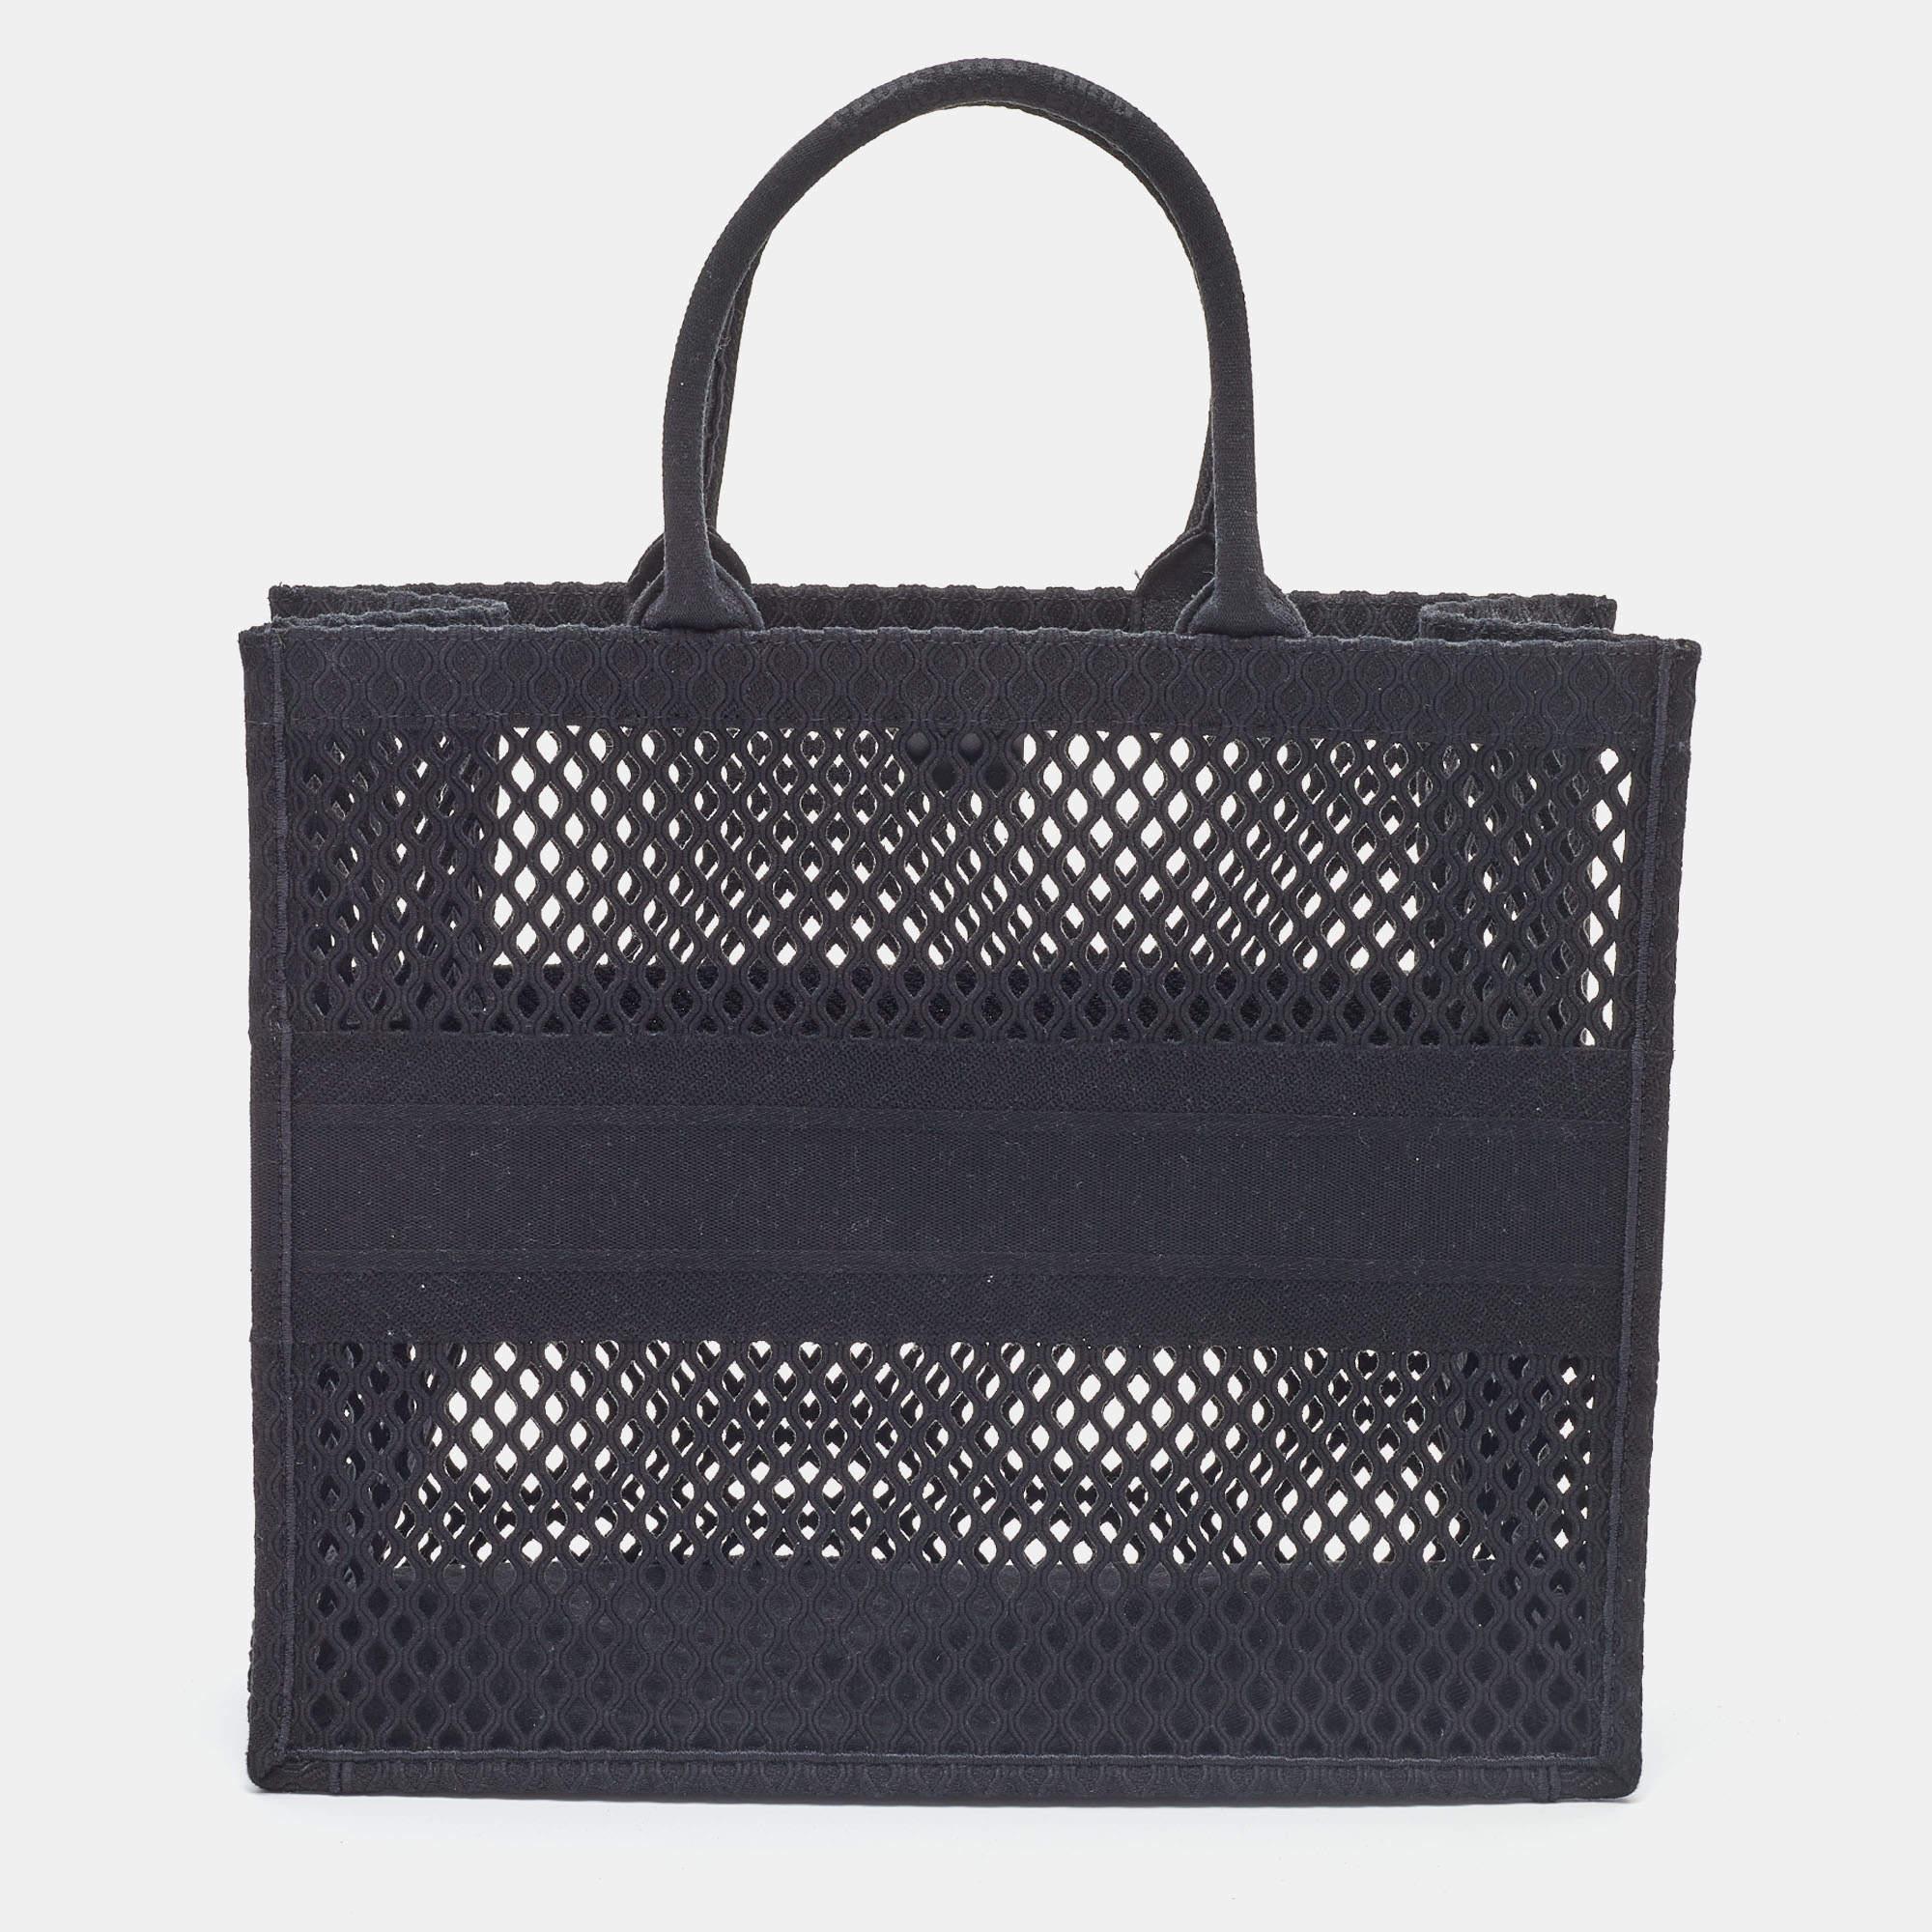 Designed by Maria Grazia Chiuri, the Dior Book Tote is a travel accessory that is one of the most coveted in the fashion world. The large version here is crafted using mesh canvas into a beautiful structure. Two handles, the 'Christian Dior' logo on